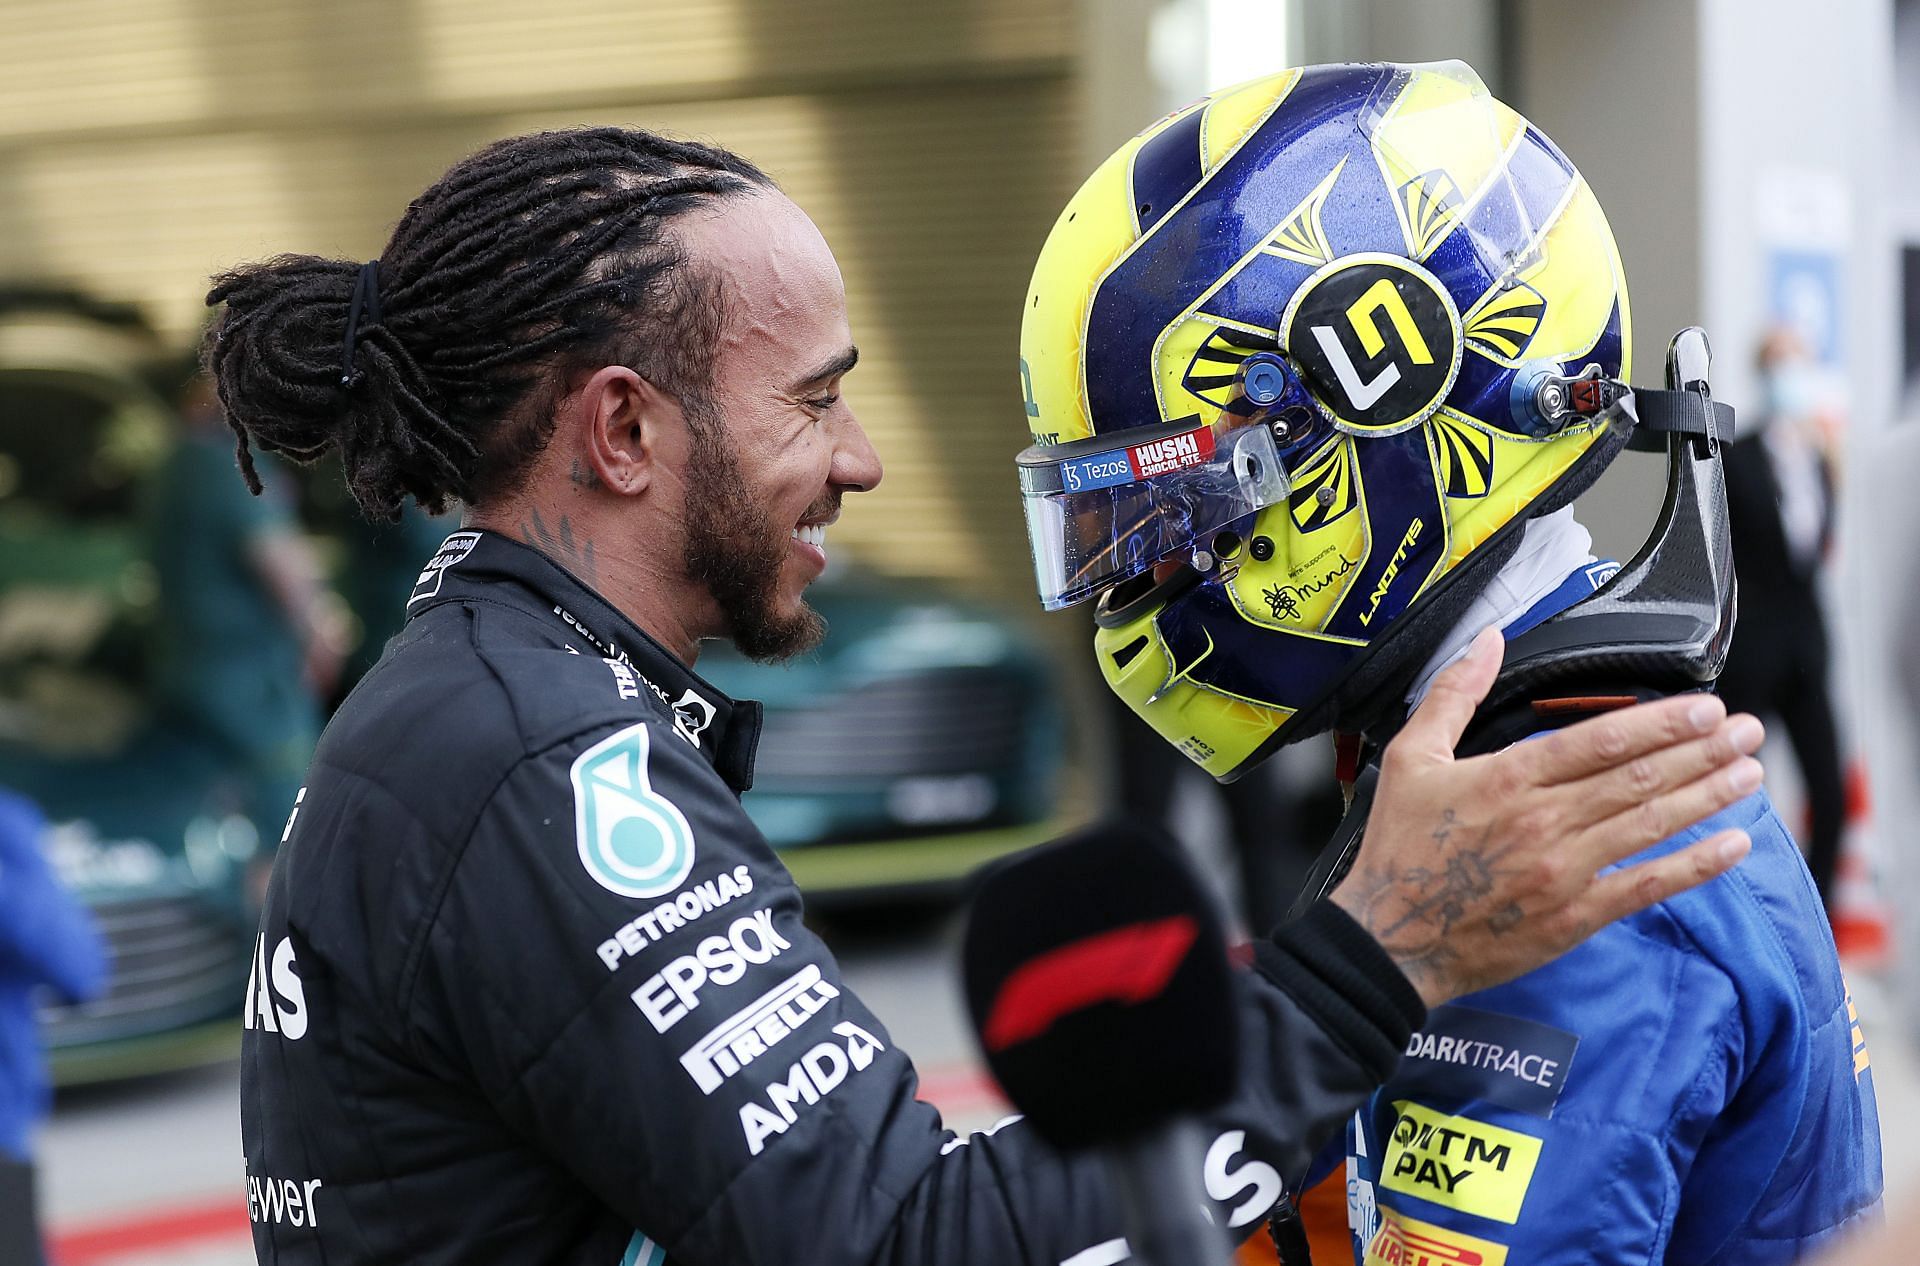 Lewis Hamilton (left) and Lando Norris (right) at the 2021 Russian Grand Prix (Photo by Yuri Kochetkov - Pool/Getty Images)